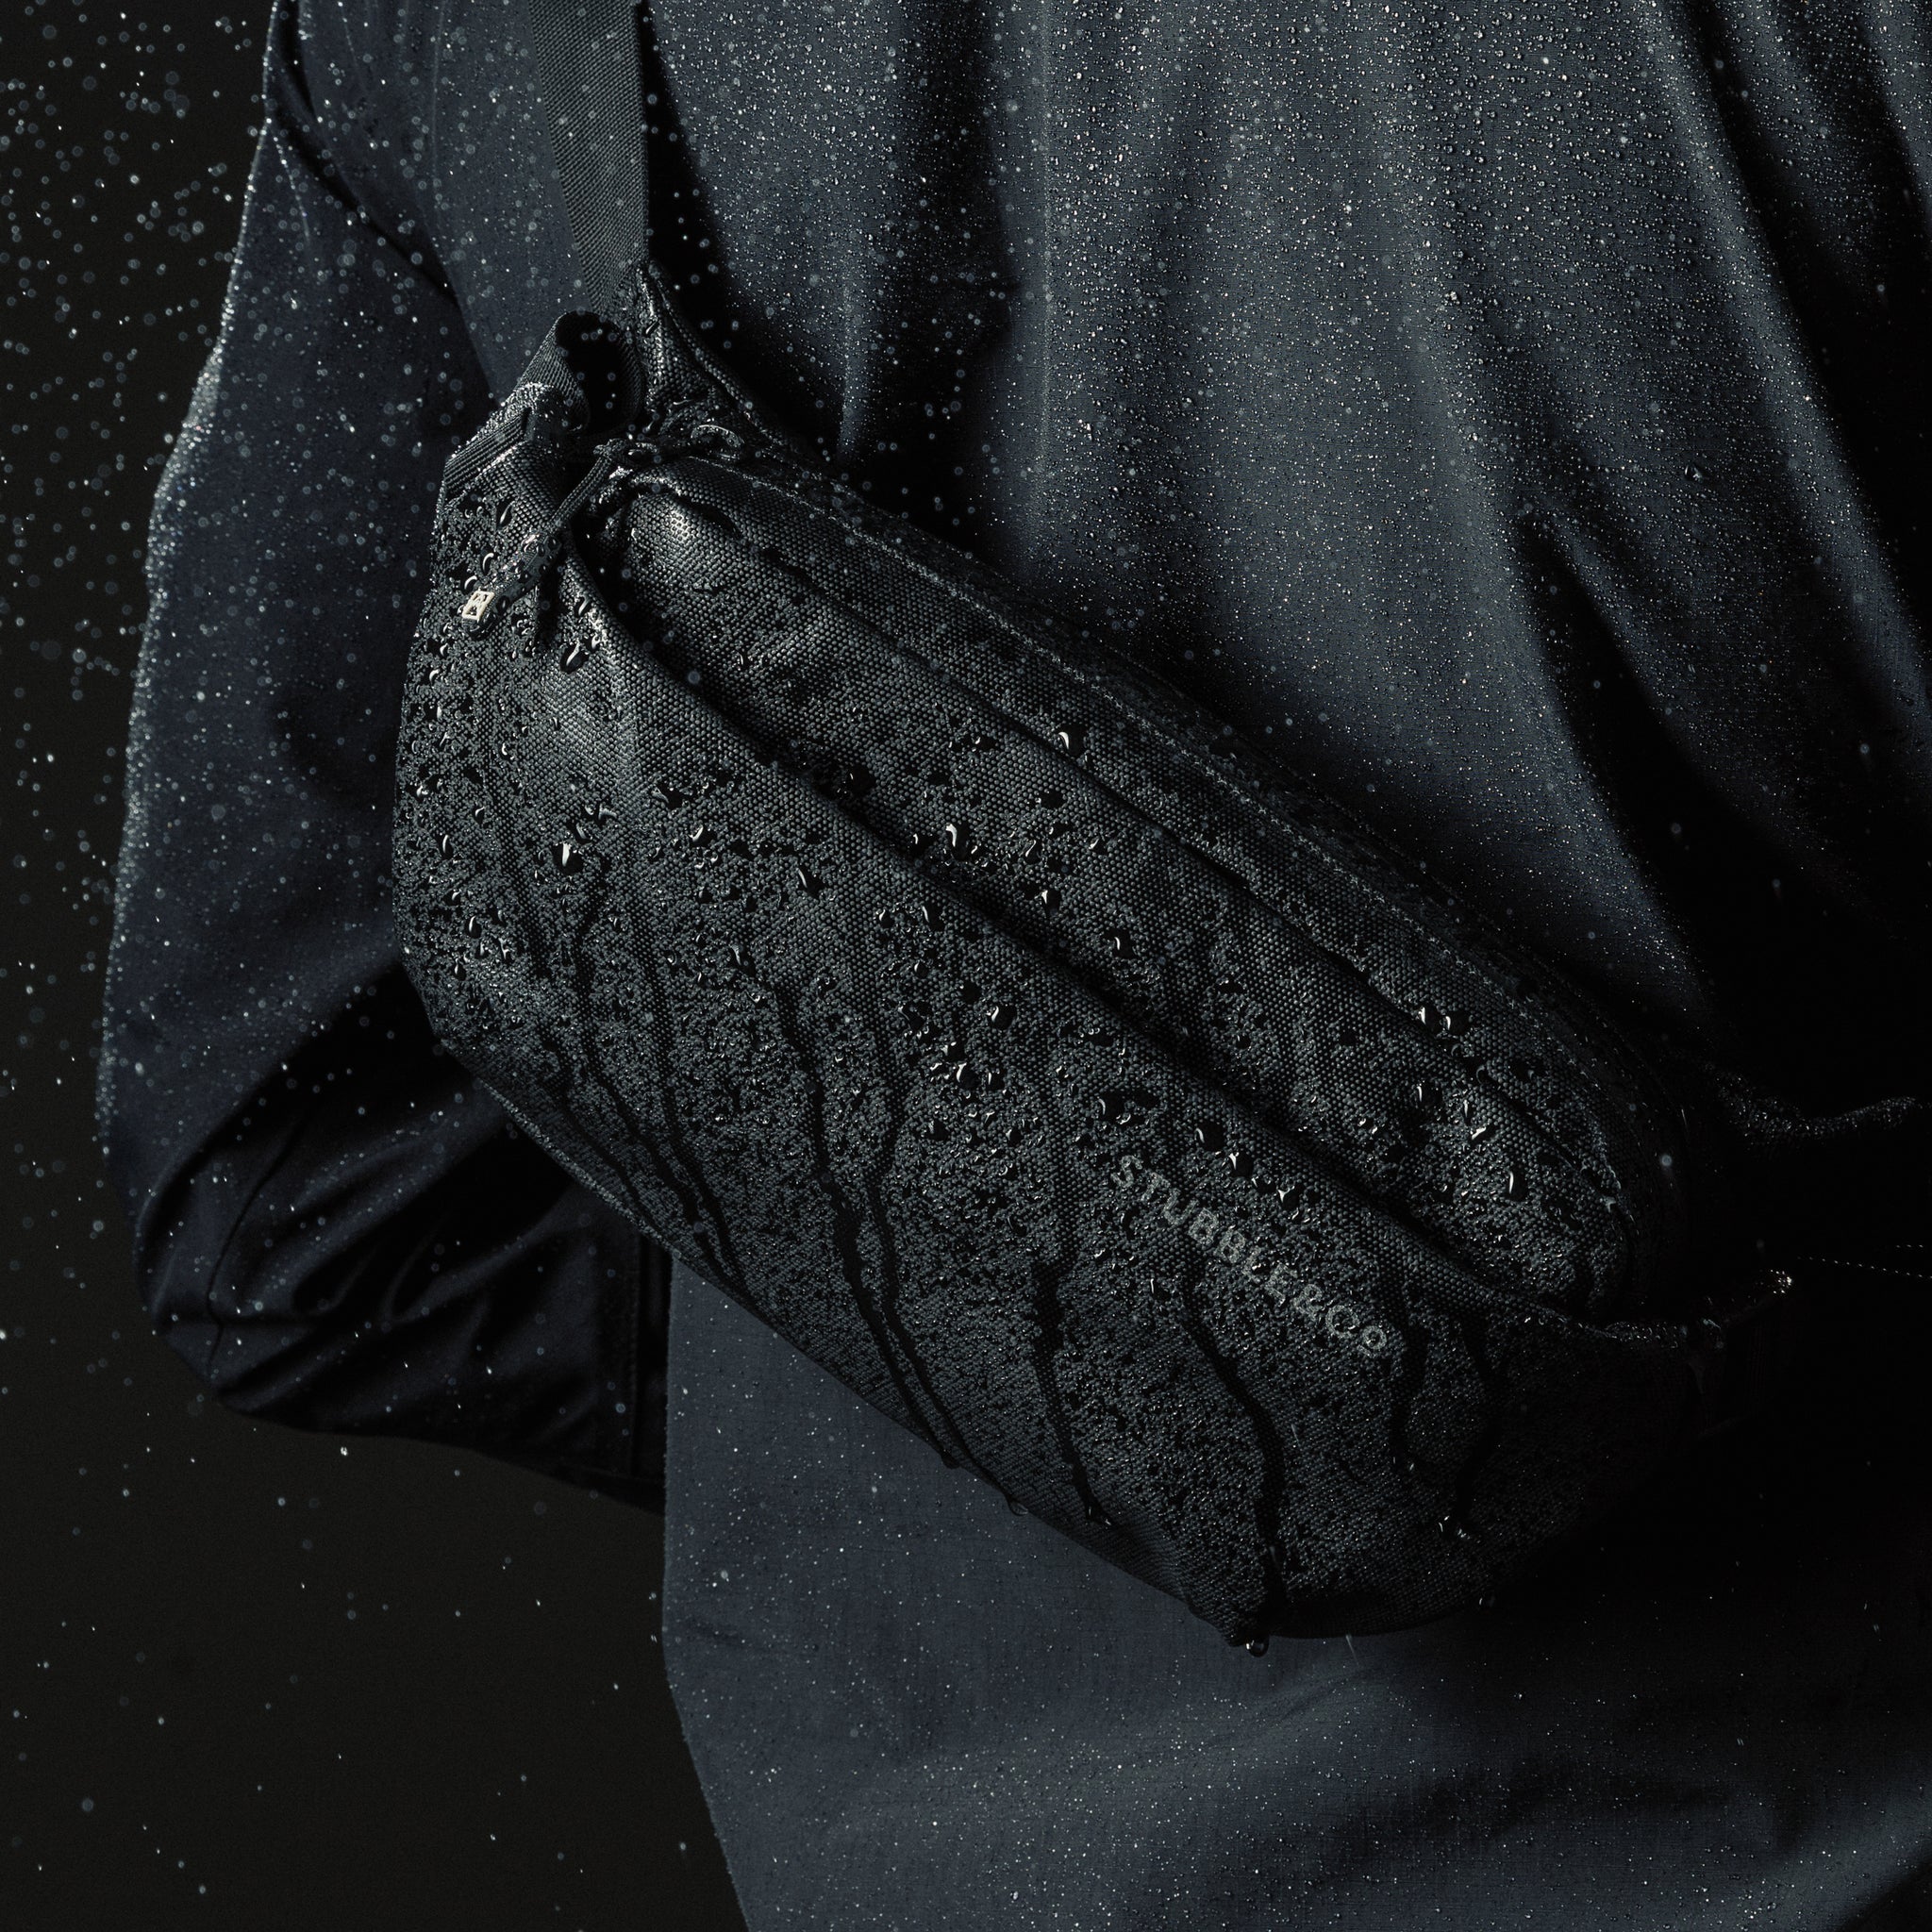 Close up of a person wearing an All Black Crossbody bag in the rain